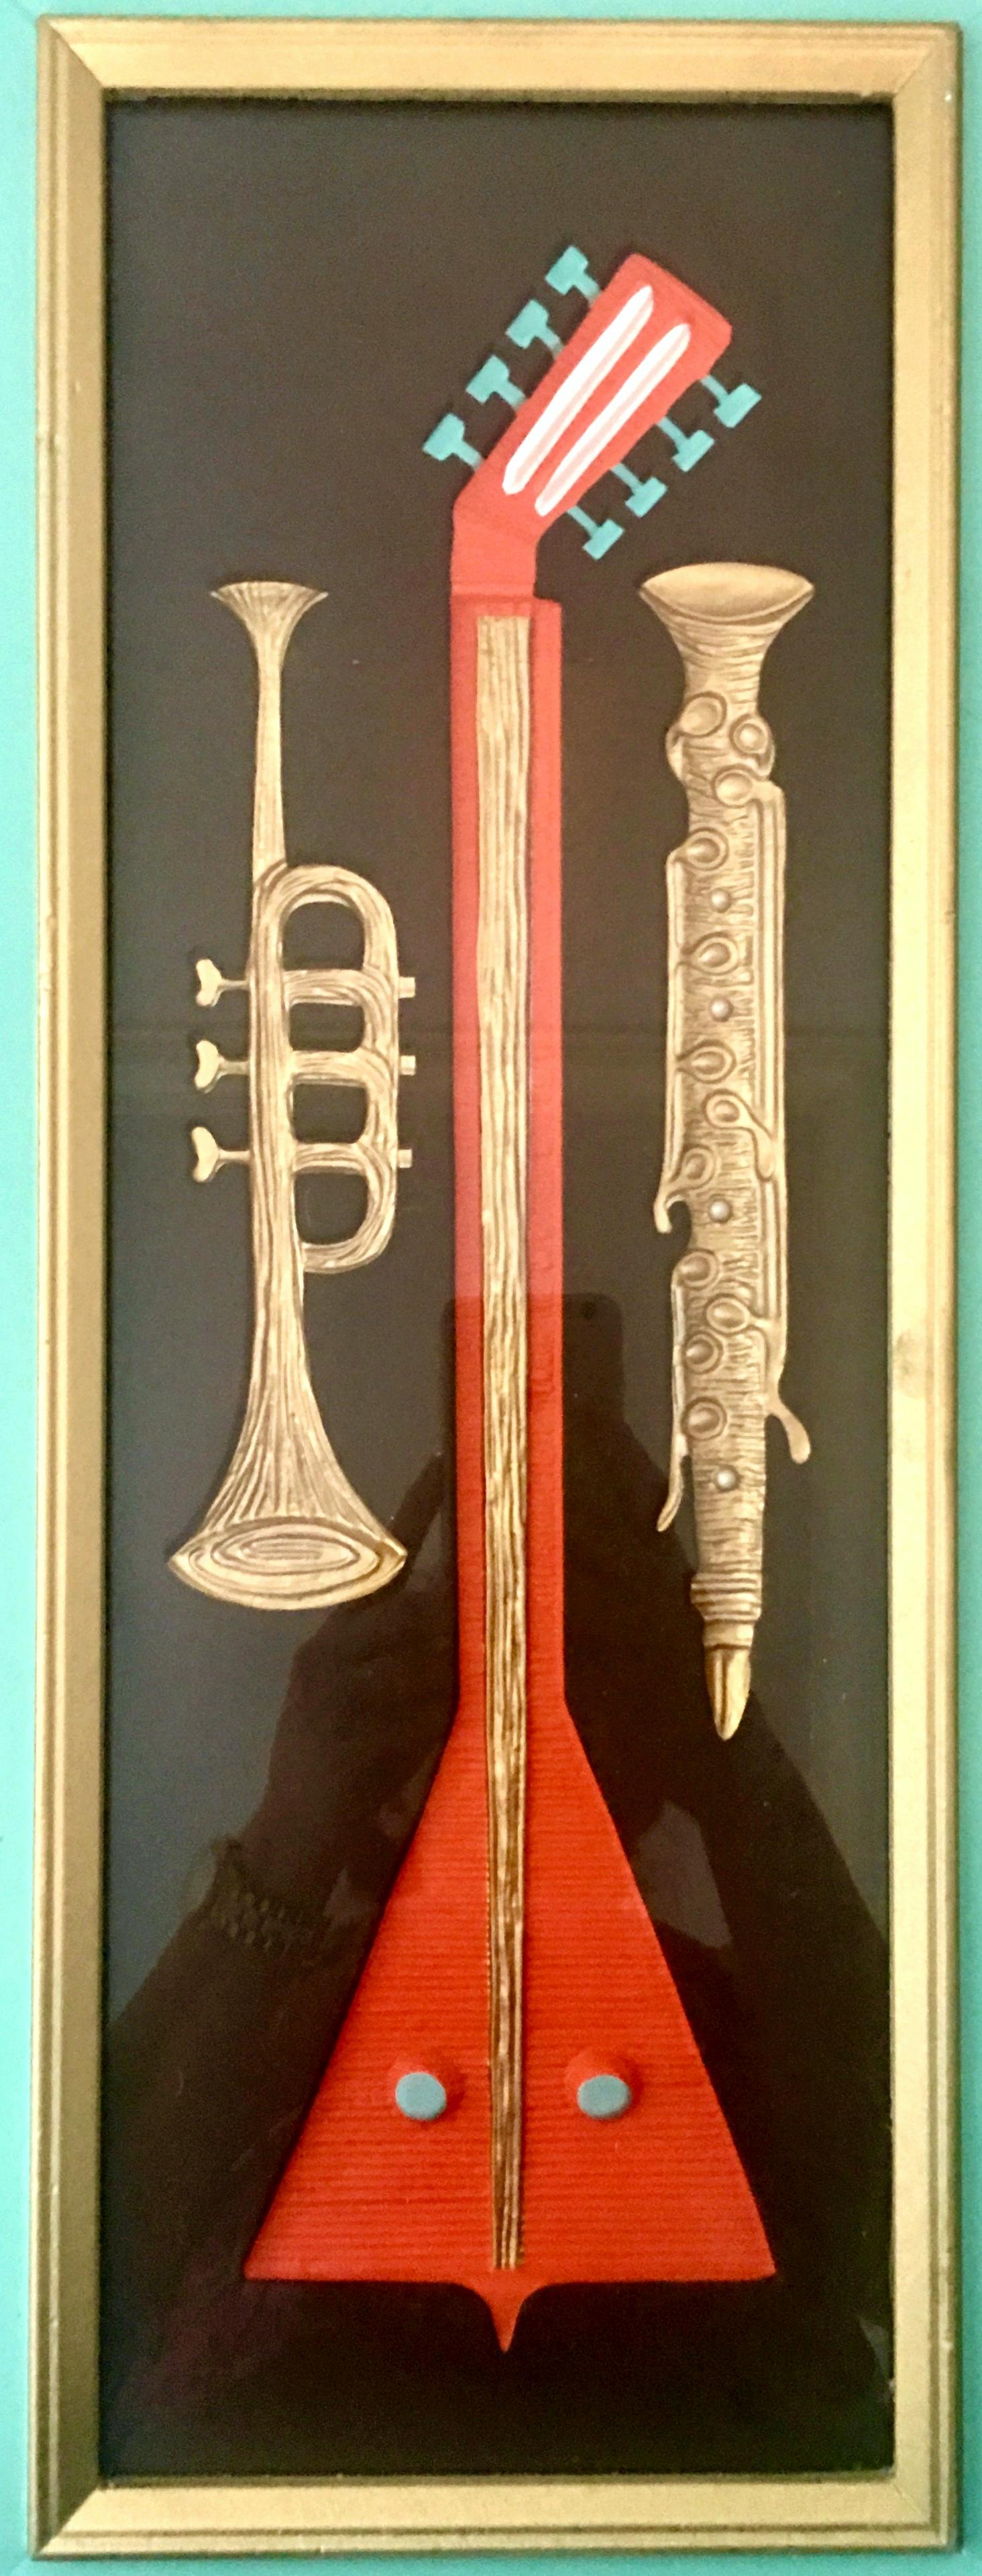 Hand-Crafted Midcentury Pair of Musical Instrument Shadow Box Painted Art by, Turner